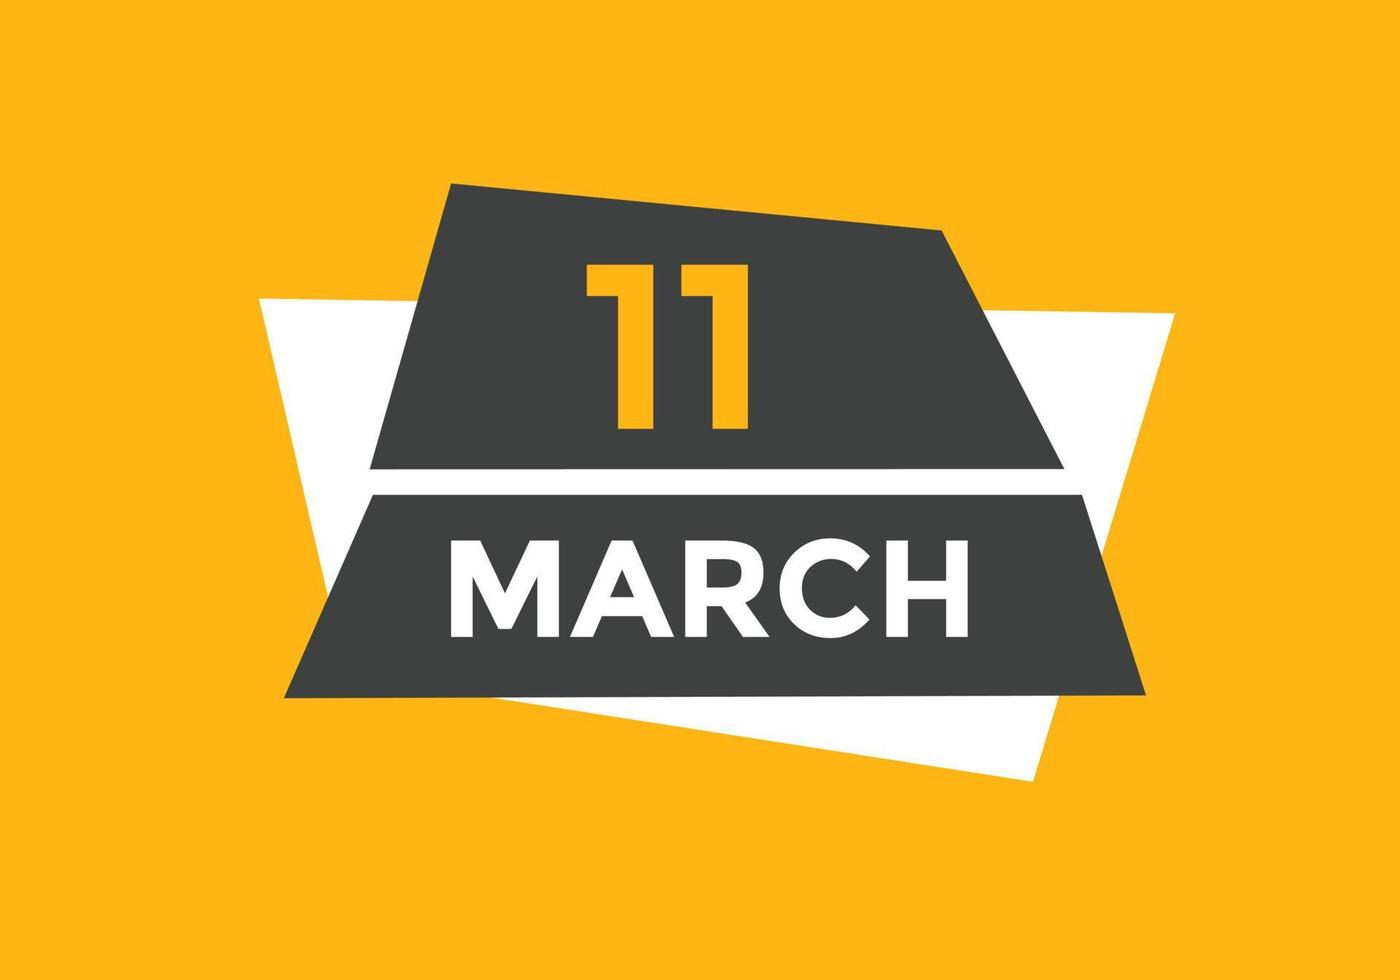 march 11 calendar reminder. 11th march daily calendar icon template. Calendar 11th march icon Design template. Vector illustration